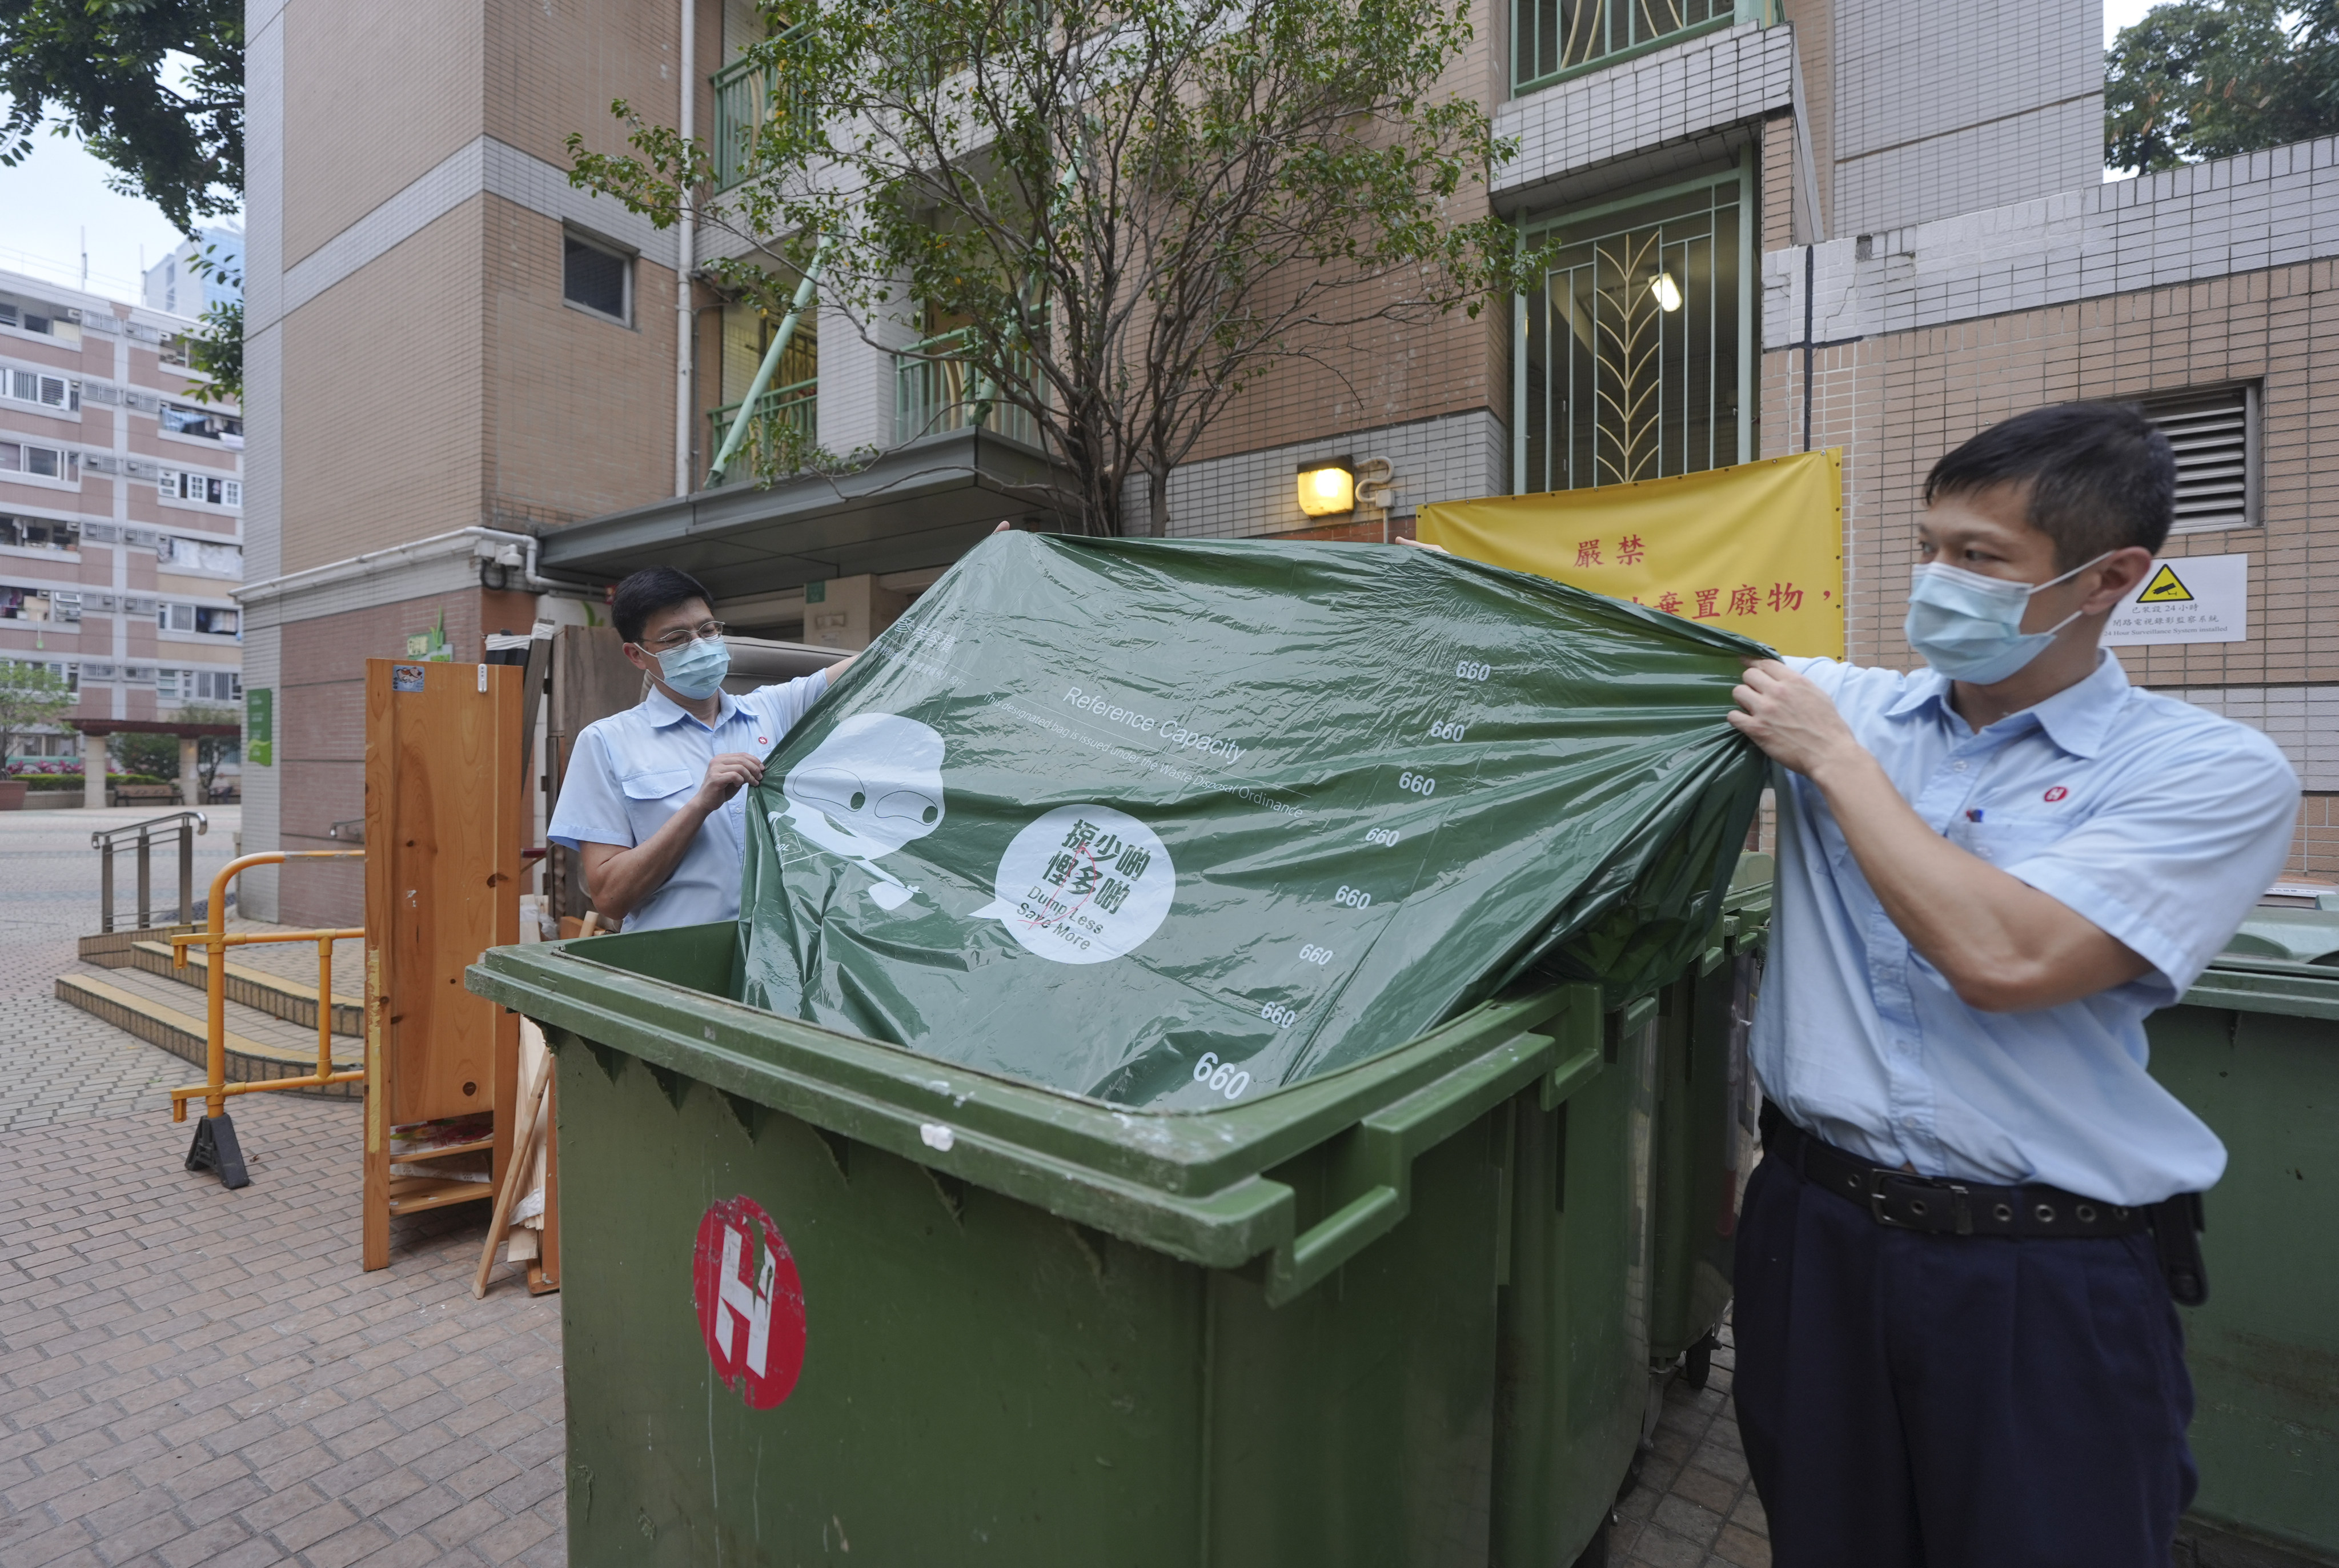 Hong Kong has launched a trial run of its waste-charging scheme, but participants are still unclear about rules. Photo: Eugene Lee